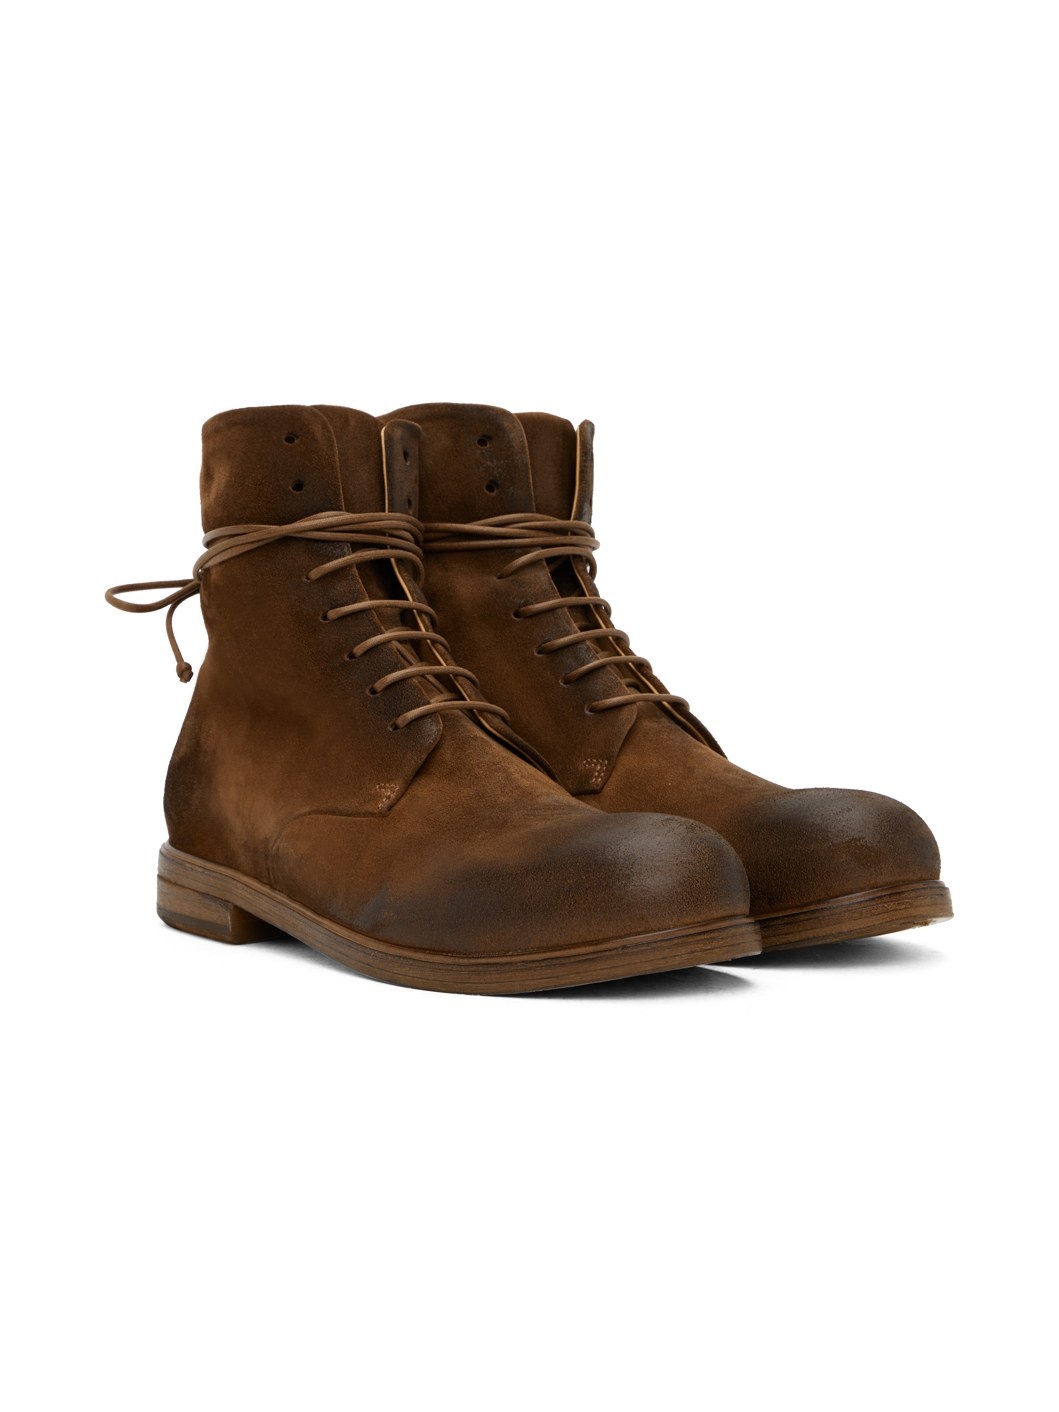 Brown Zucca Media Boots - 4